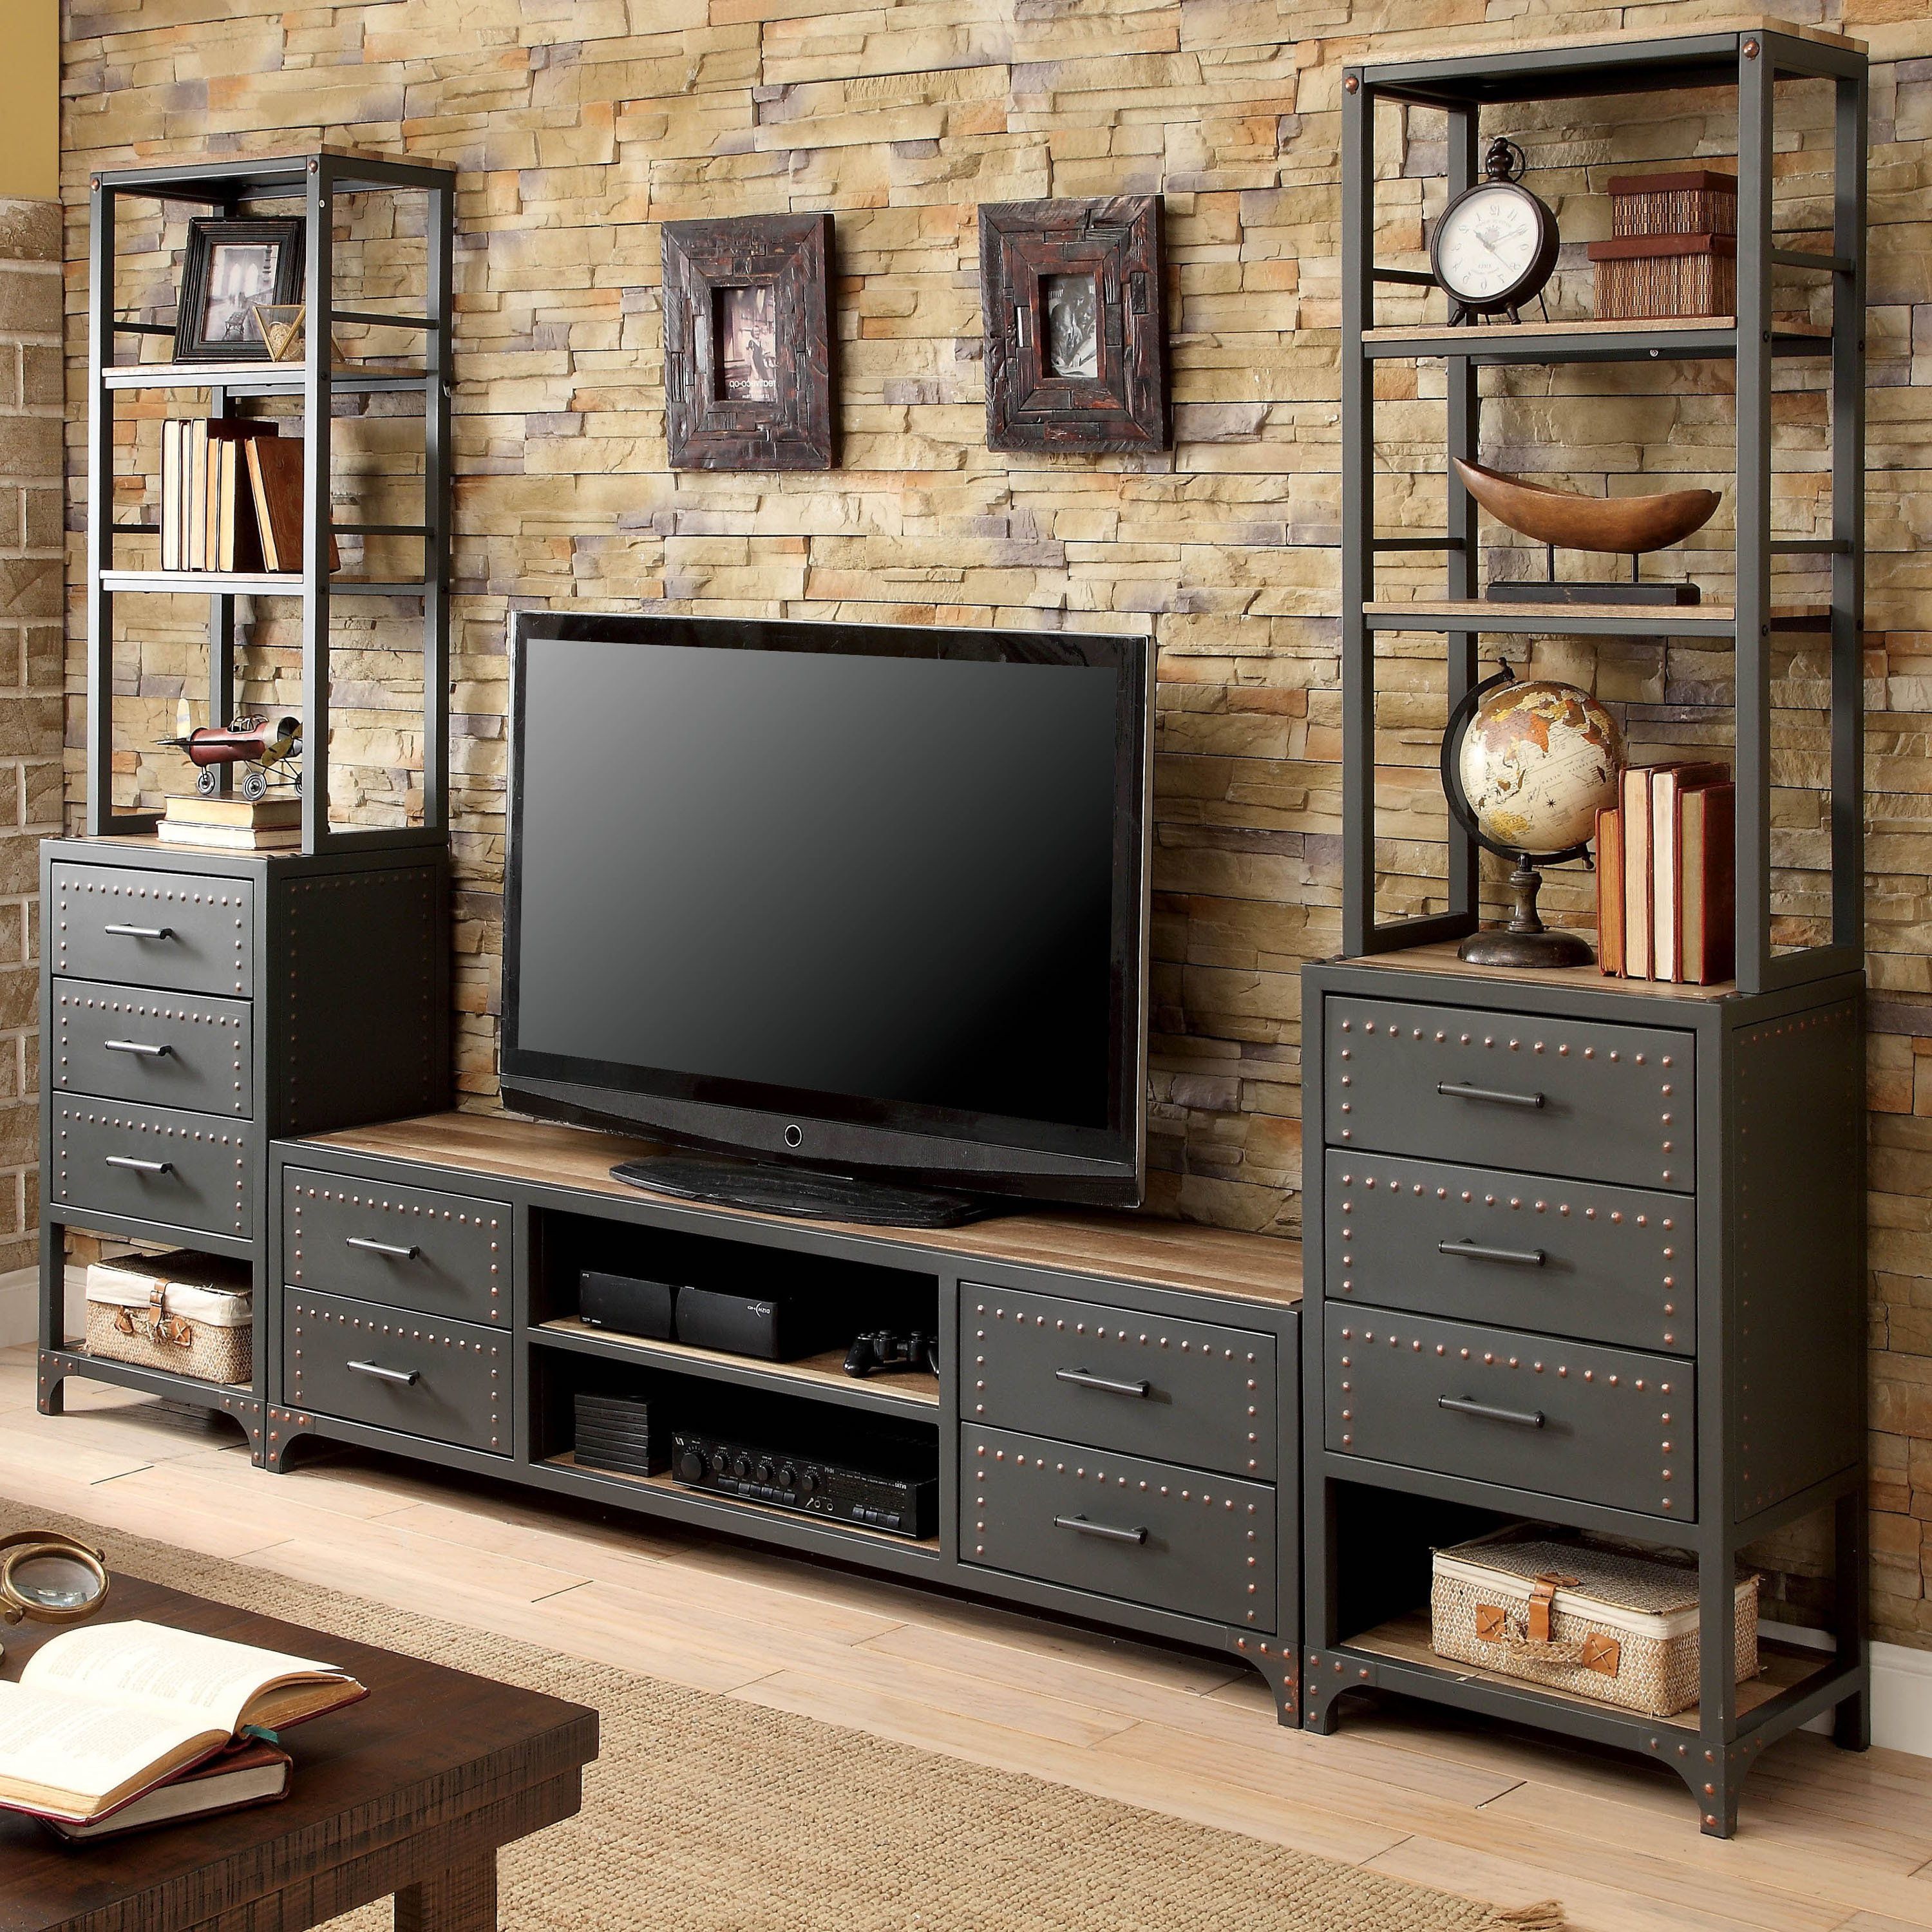 Top 20 of Industrial Style Tv Stands